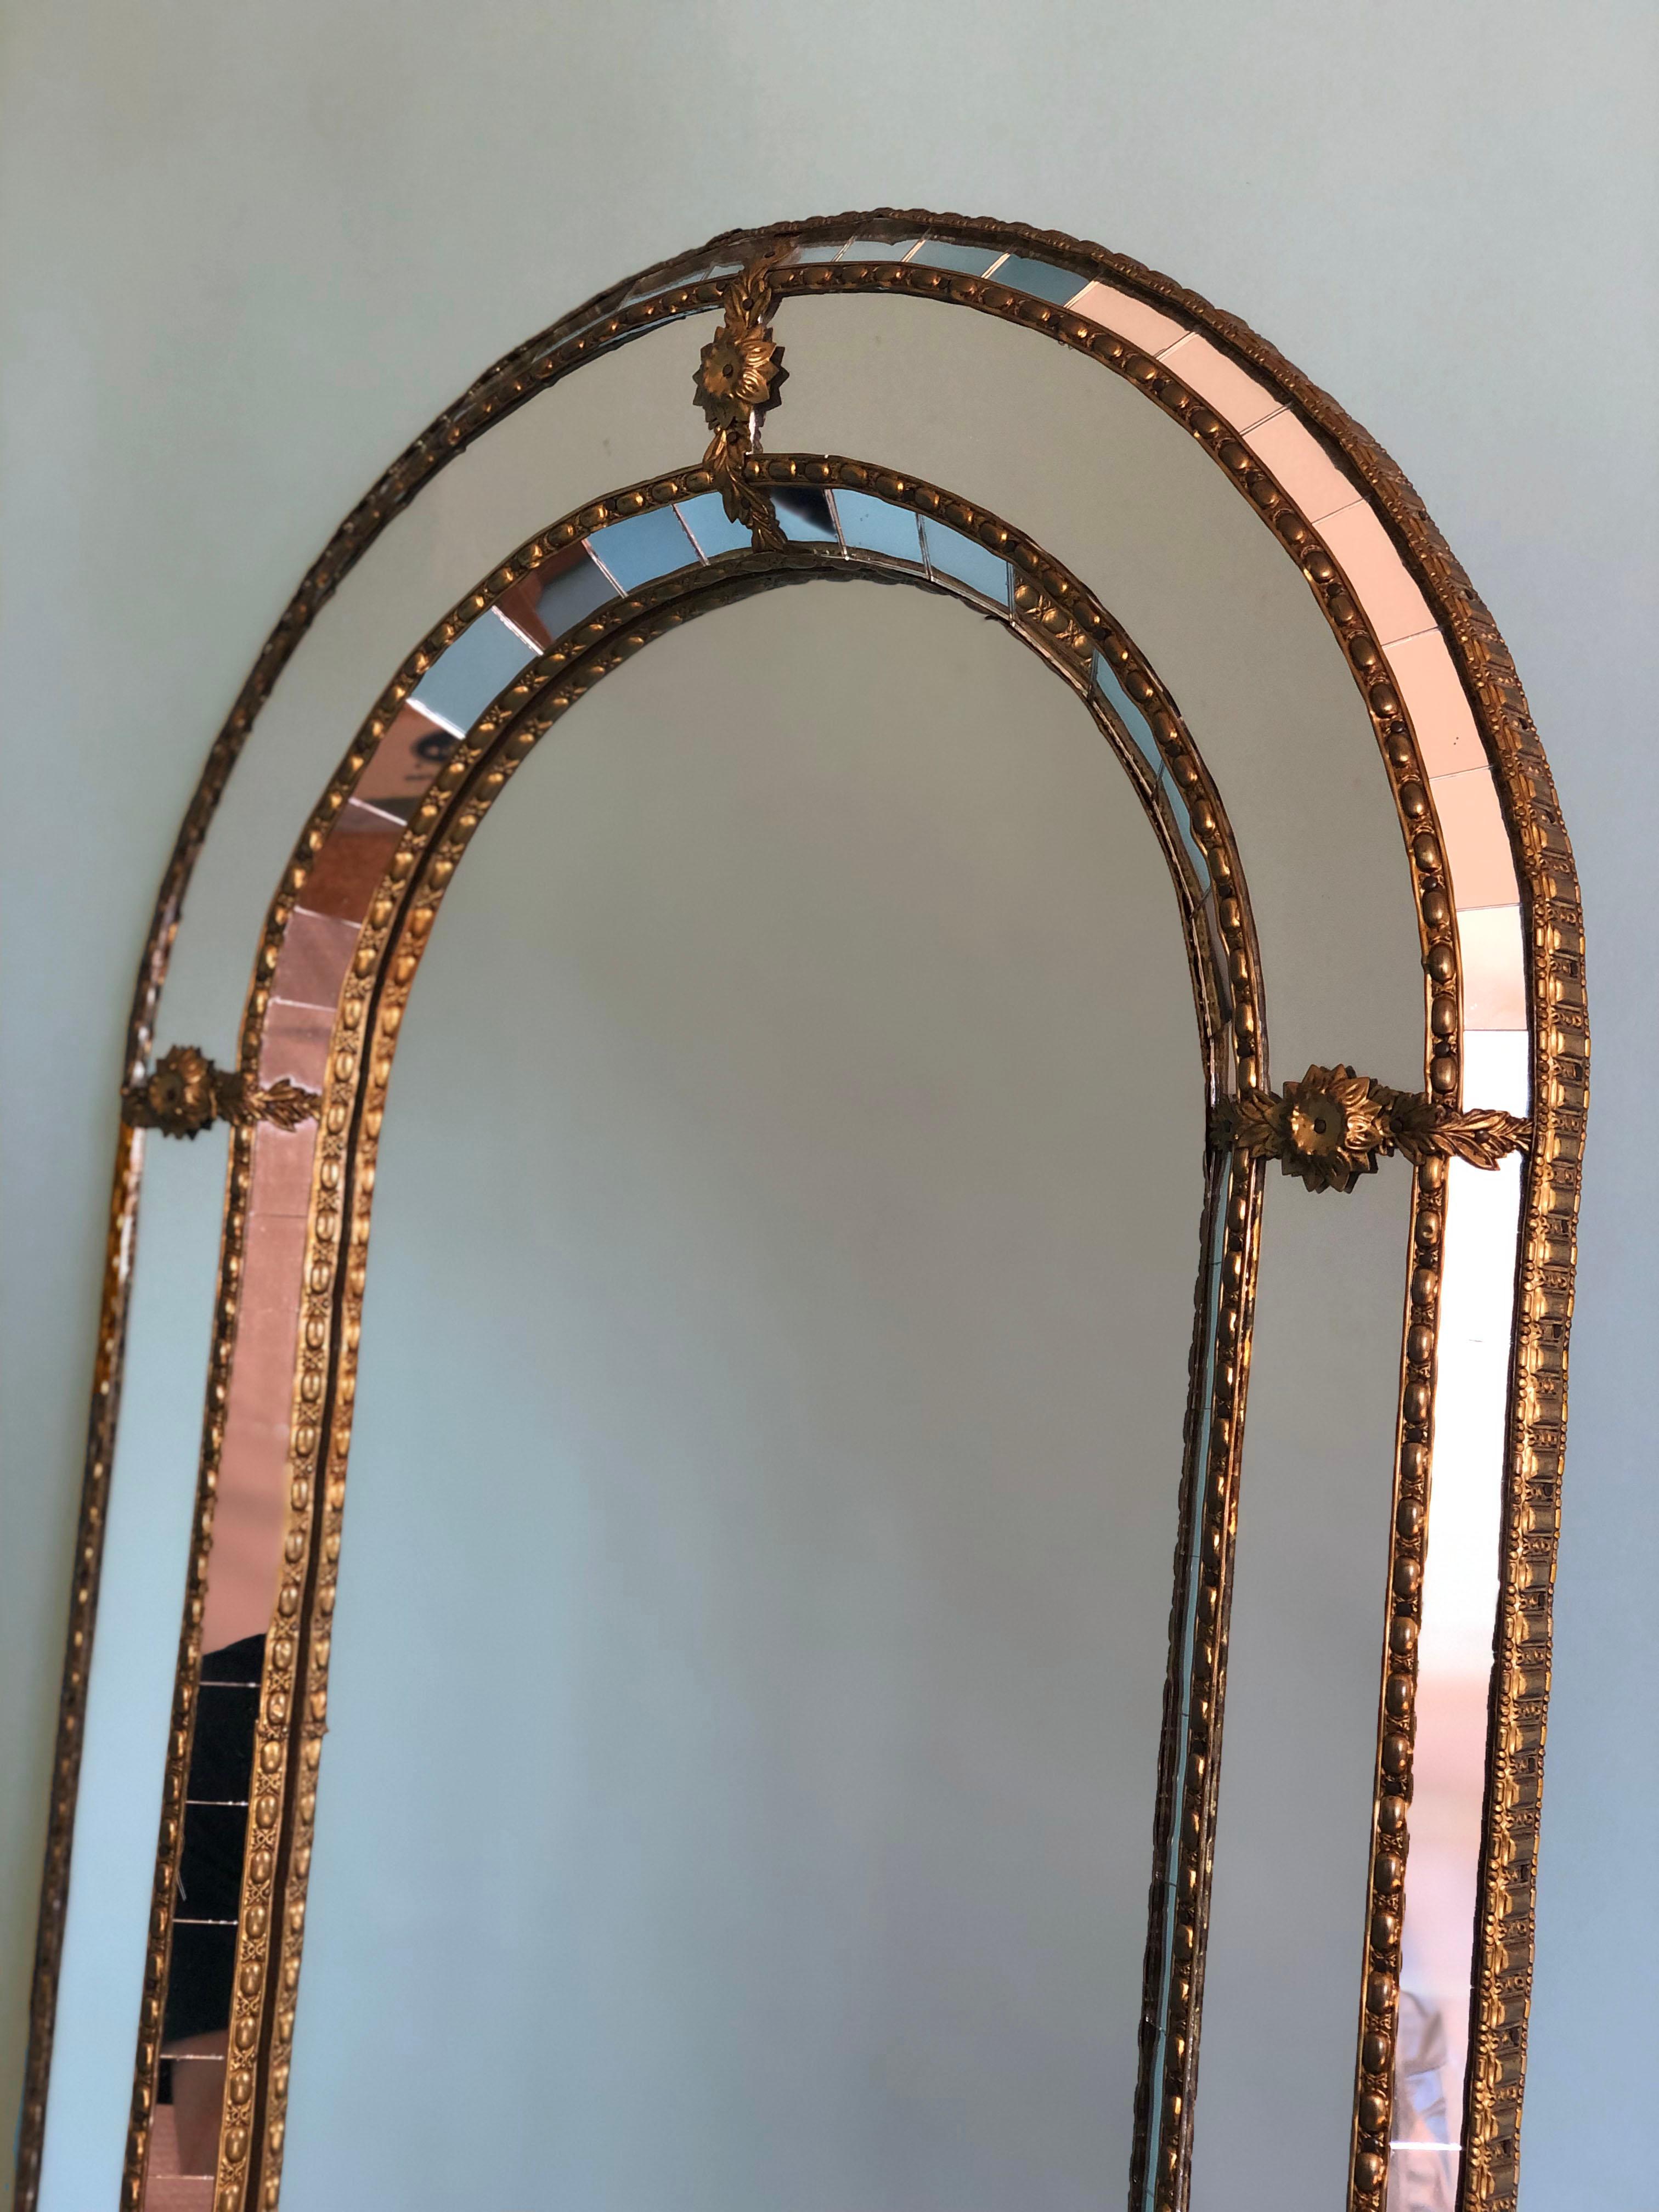 Beautiful Spanish full length mirror with a Venetian glass frame with a brass golden strip. The frame is made with small crystals both on the outside and inside, and larger ones in the center line. The brass strip holds the mirrors